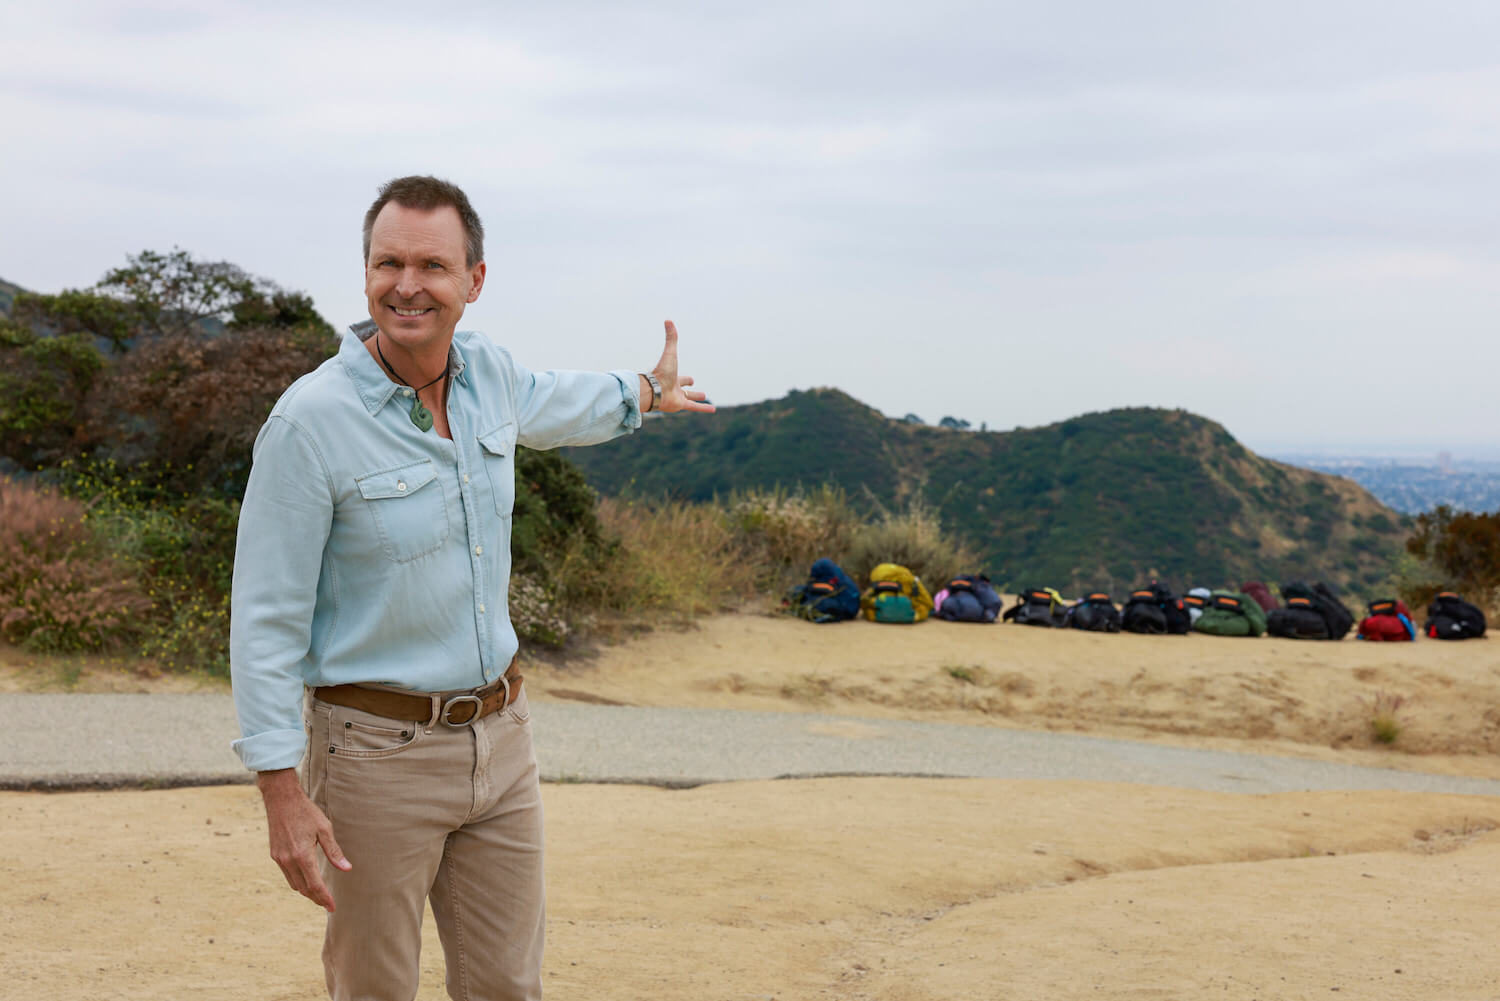 'The Amazing Race' Season 35 host Phil Keoghan smiling and showing the landscape